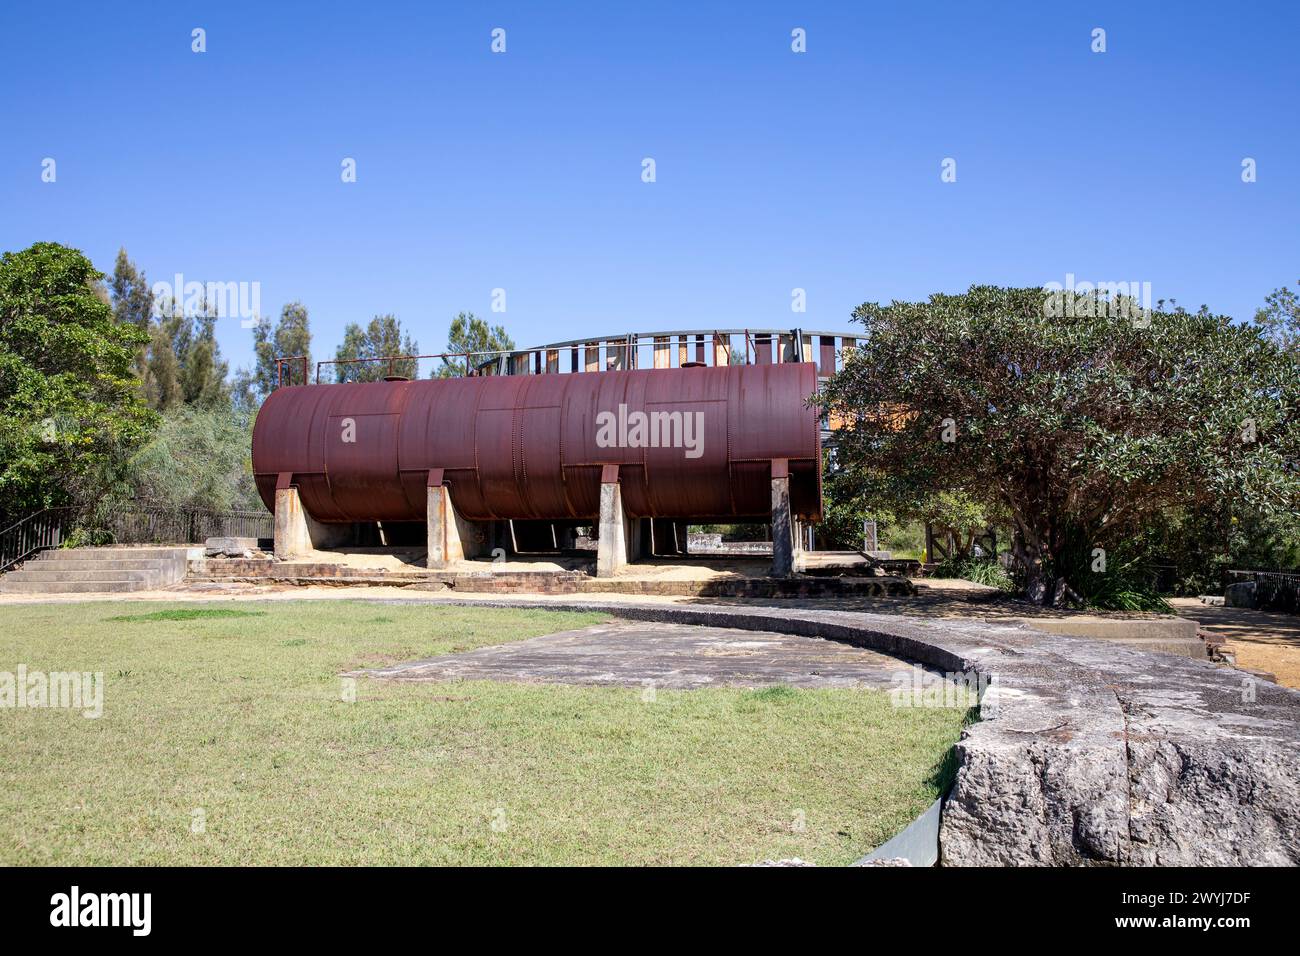 Ballast Point park and its industrial past includes tank 101 and oil storage tanks from refinery days,Sydney harbour,NSW,Australia Stock Photo